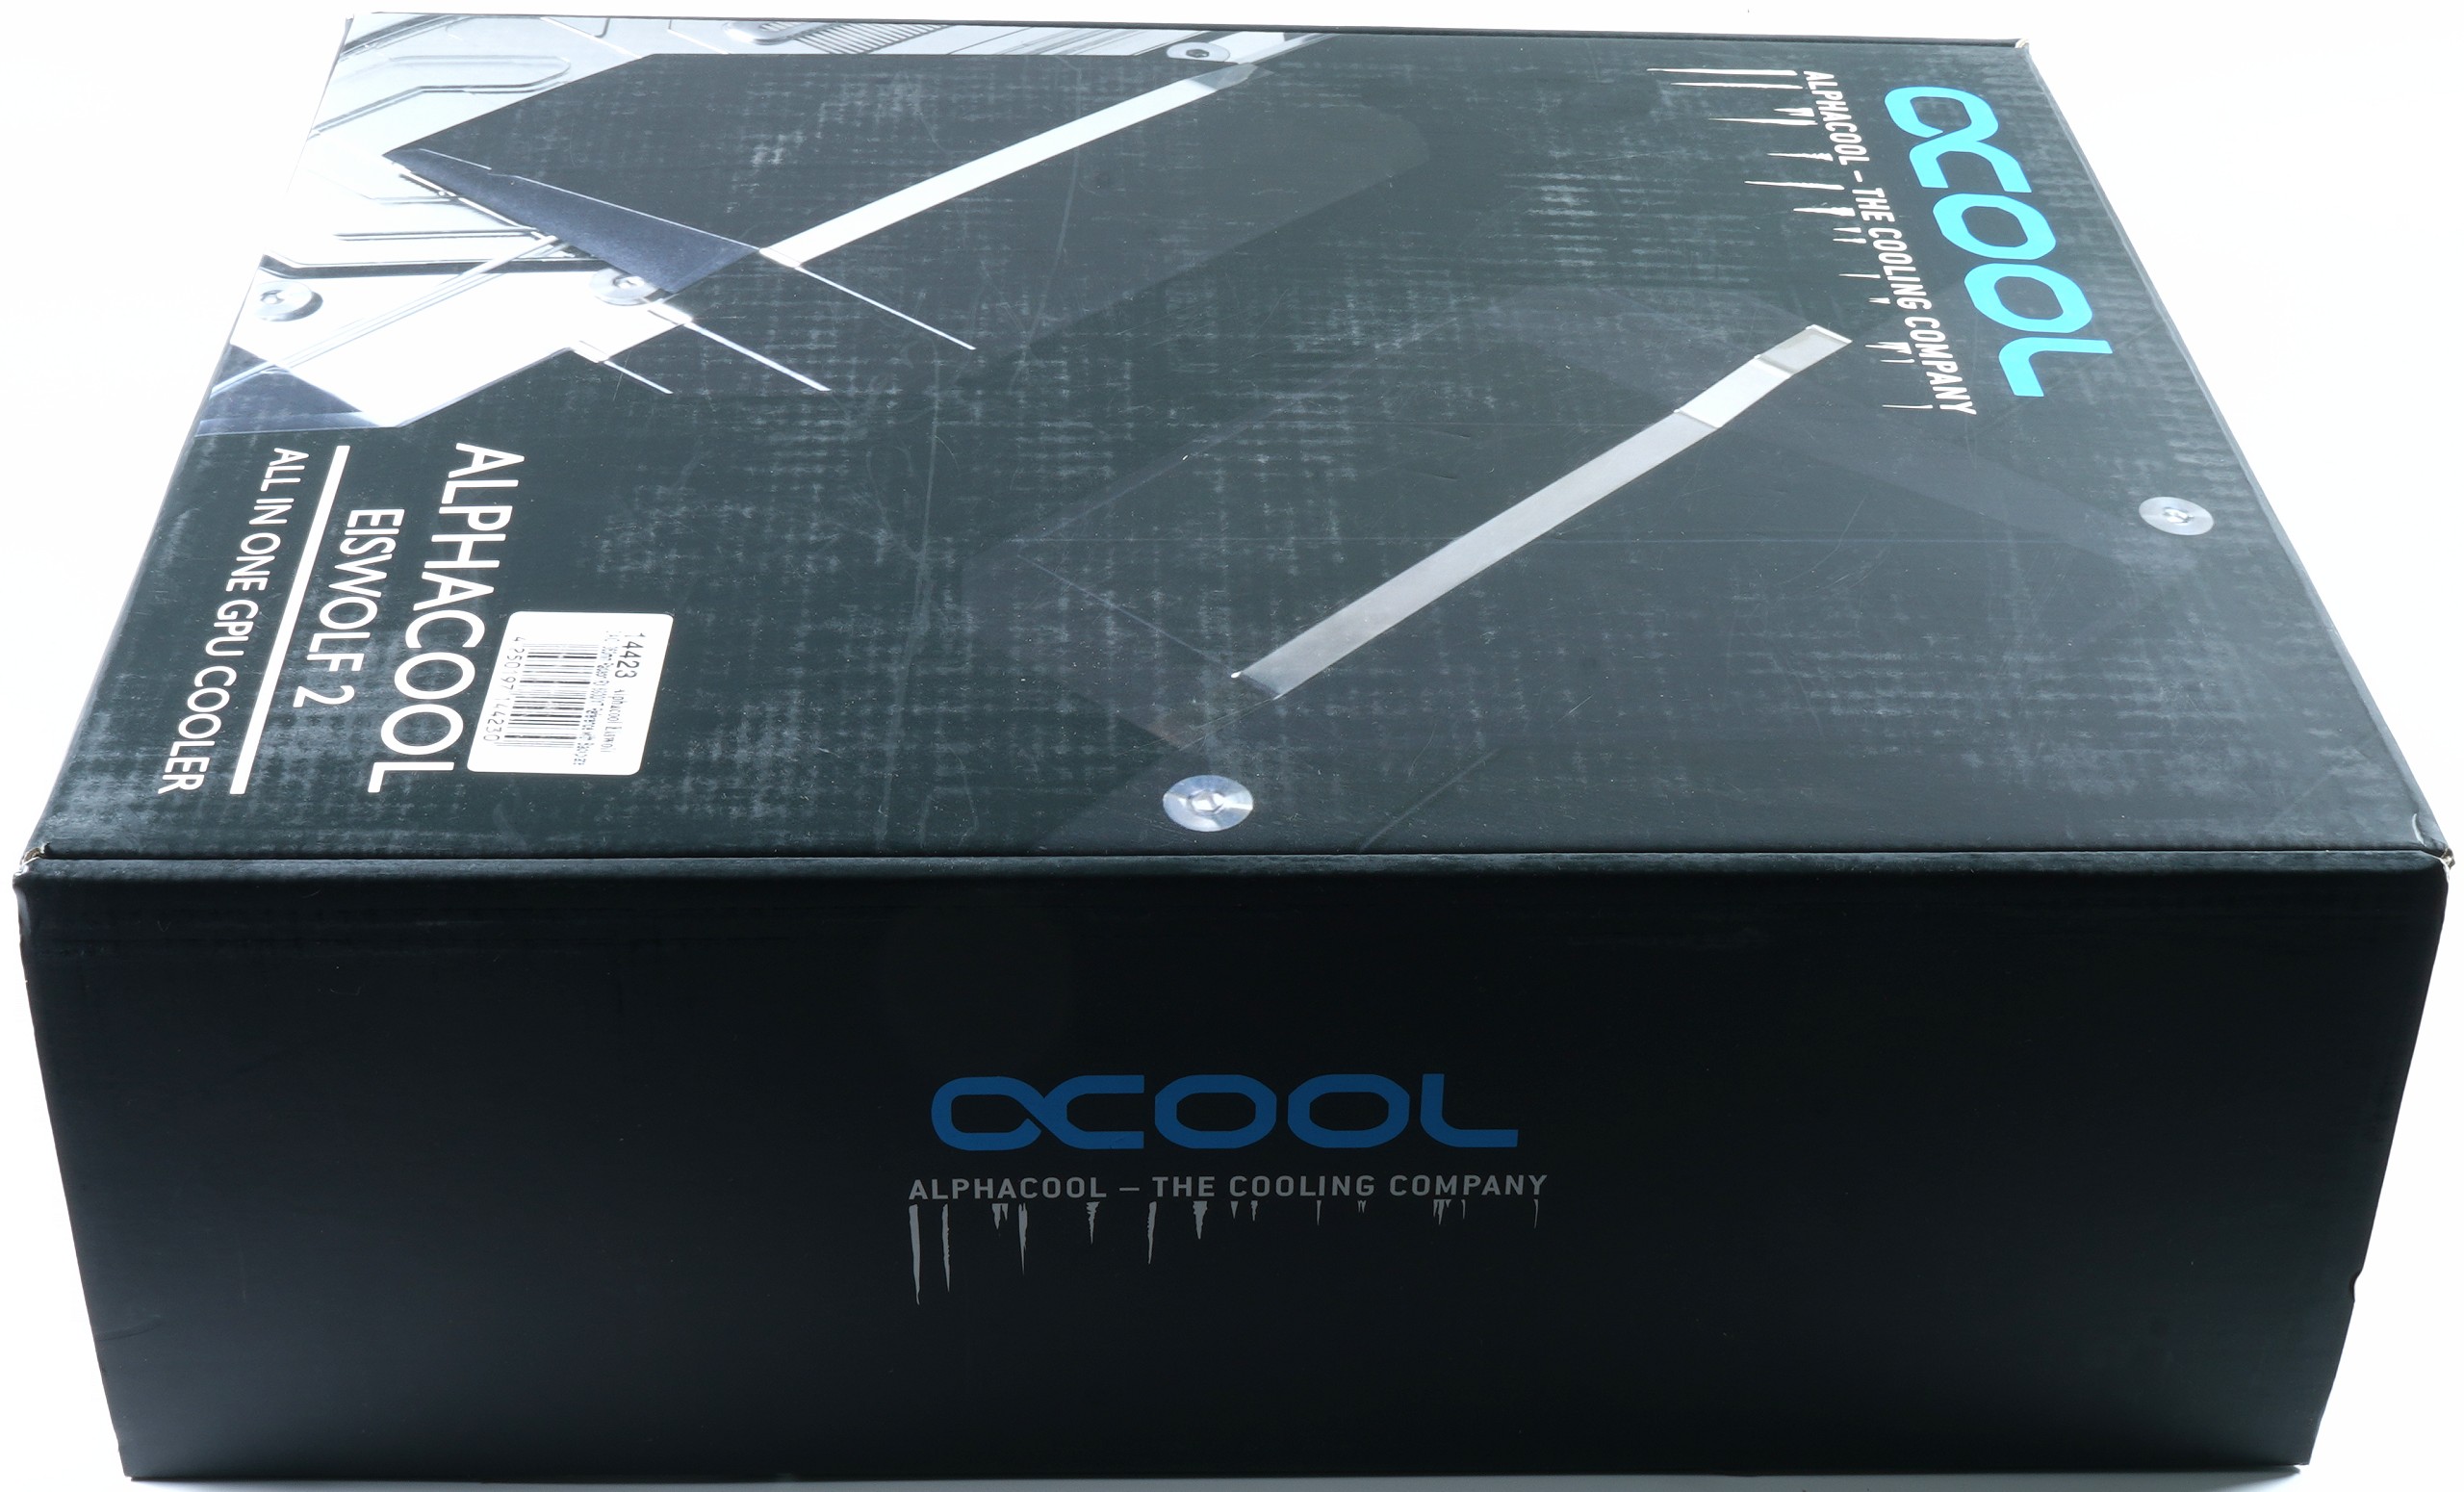 Igors Lab has tested our Apex Soft & - Alphacool English